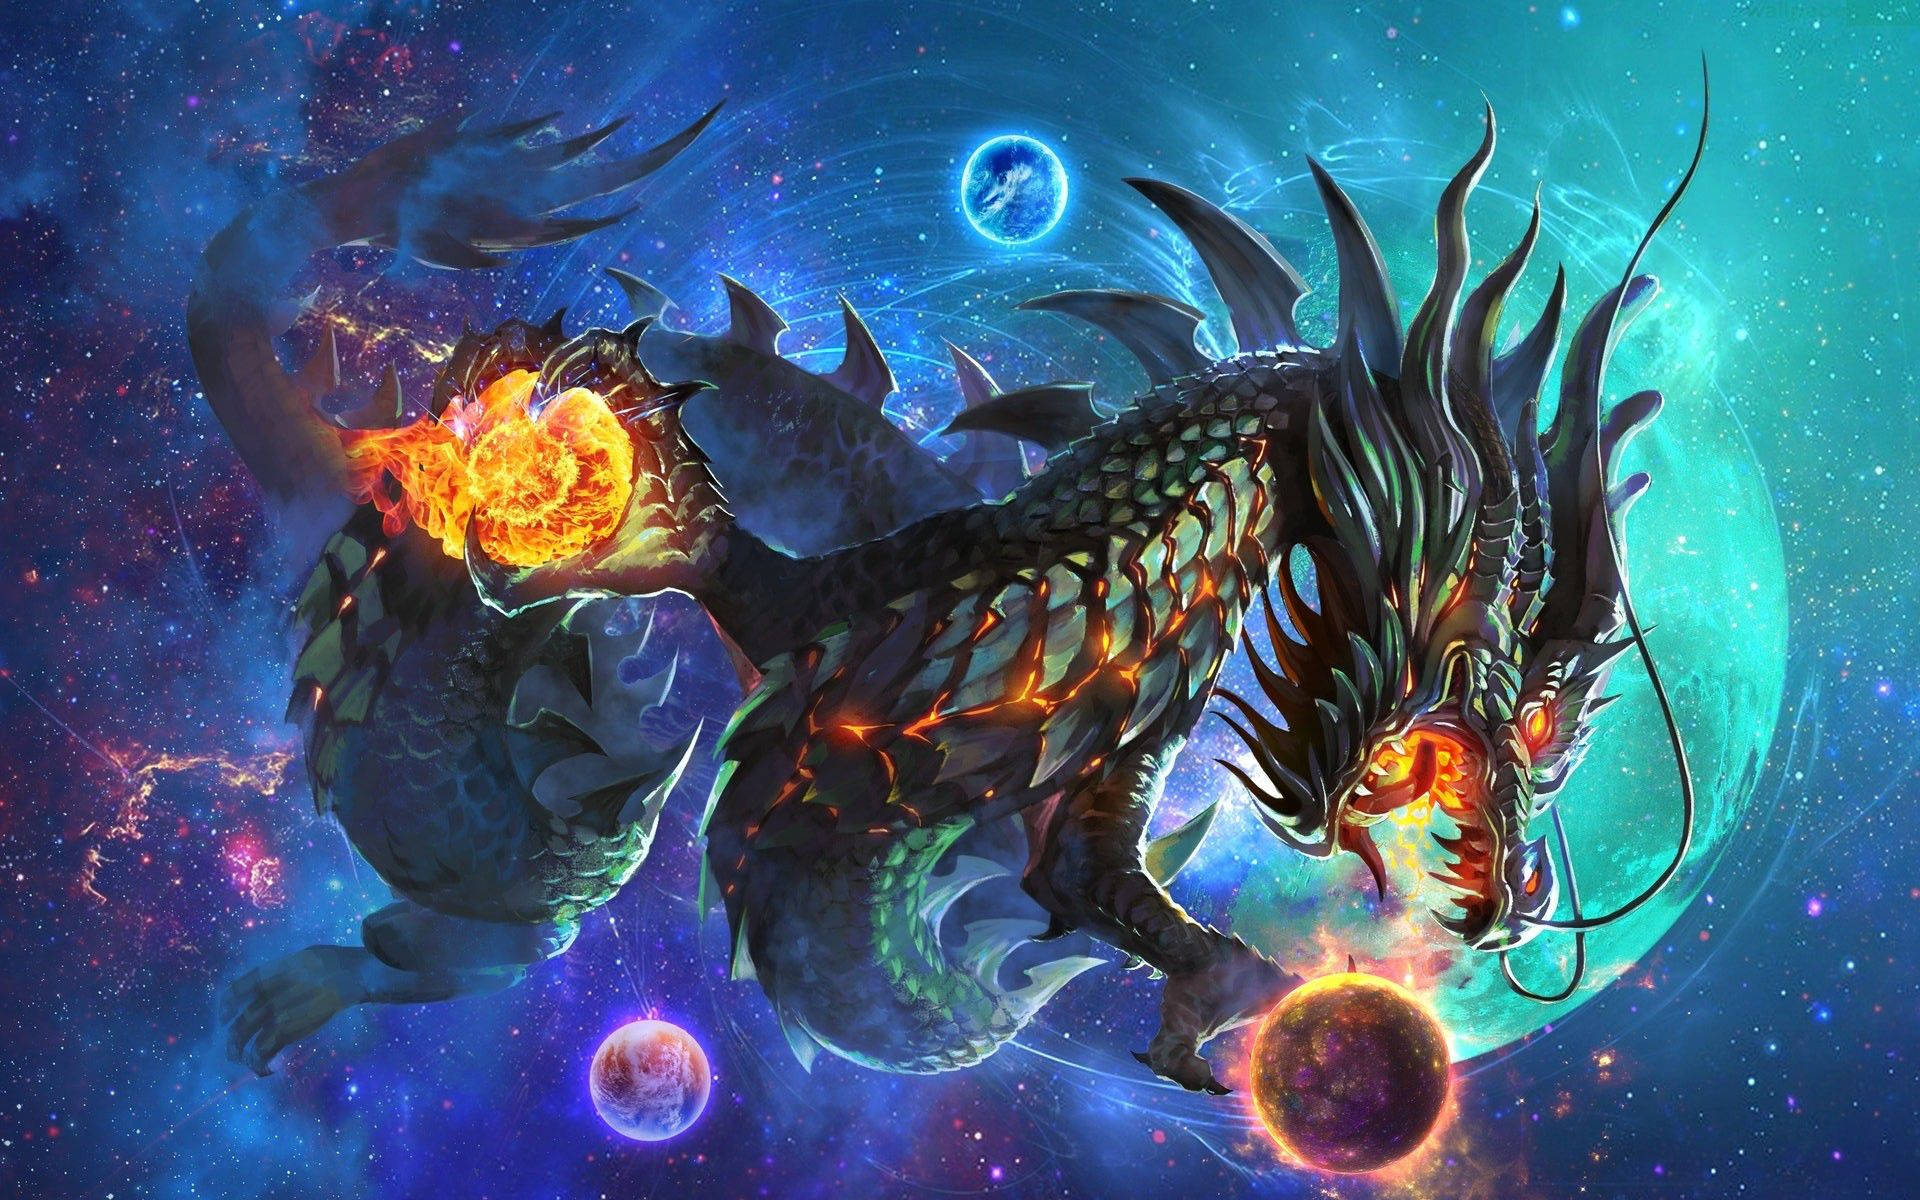 A magical and awe-inspiring coolest dragon Wallpaper